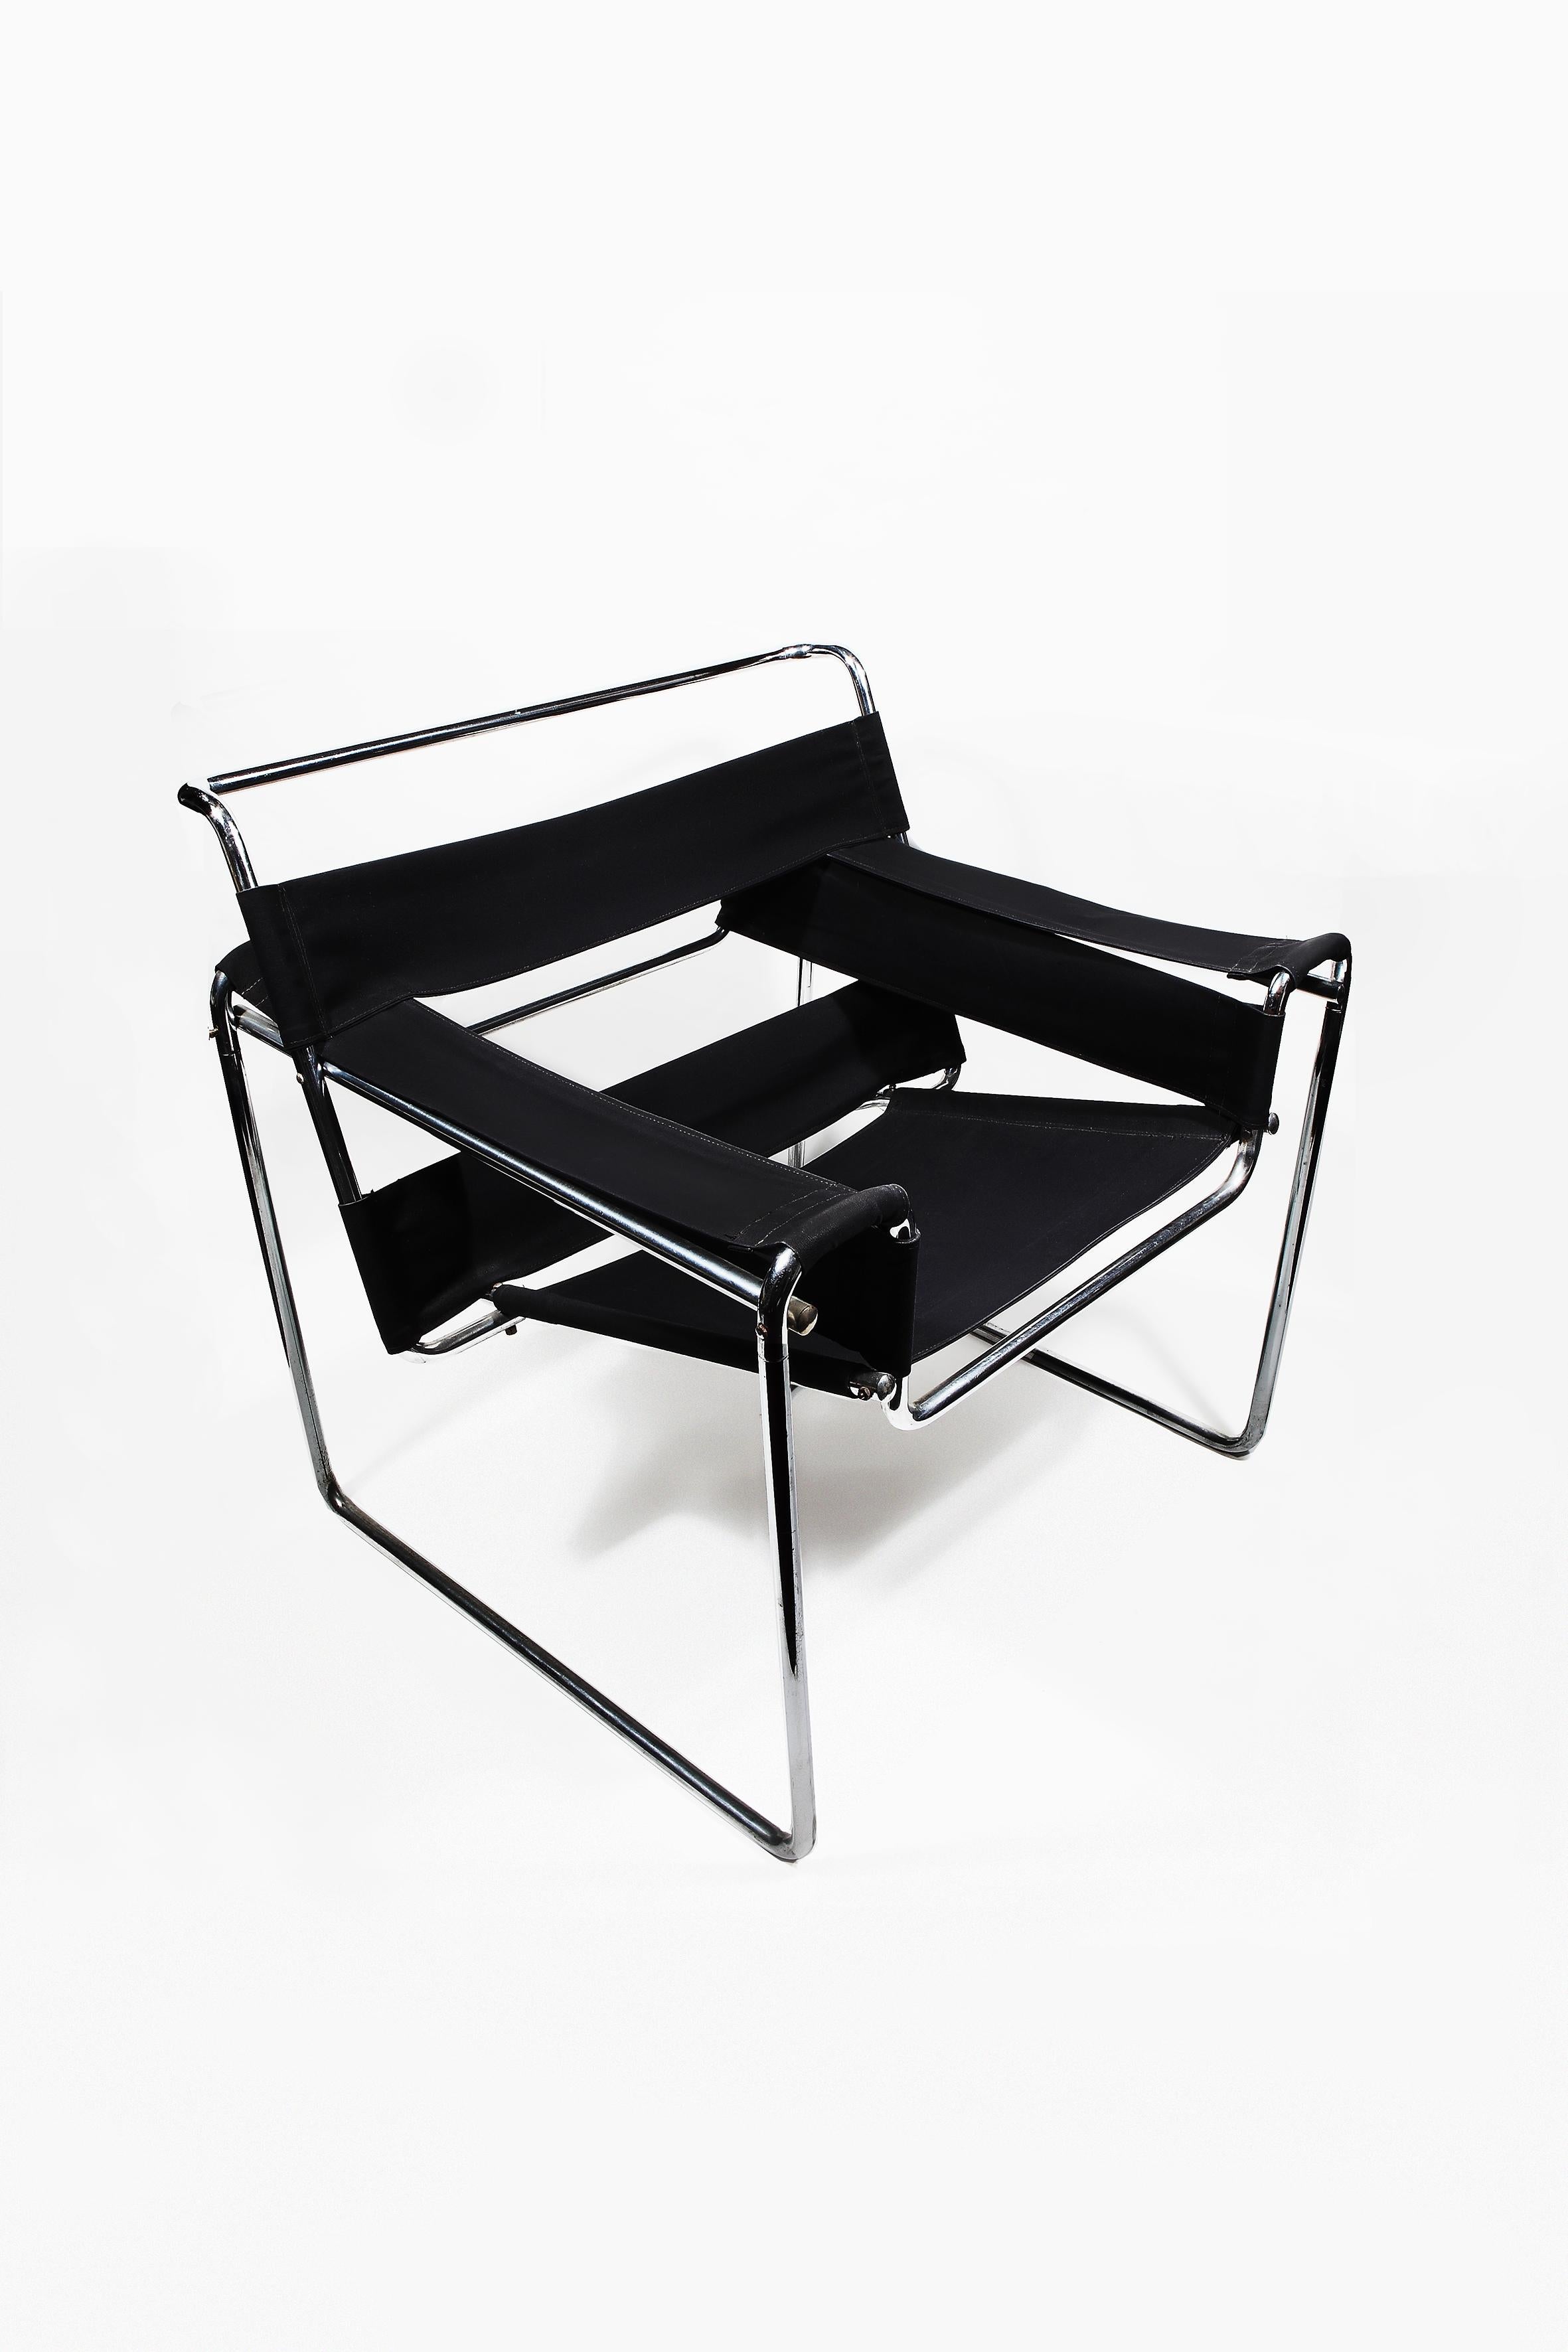 Club armchair, 1927. Model B3. Designer: Marcel Breuer, Manufactured by Standart-Möbel. First series production. Upholstered with black, renewed Eisengarn ( iron yarn ). Very rare. Very good condition.
Measurements: Height ca. 29.13 in ( 74 cm ),